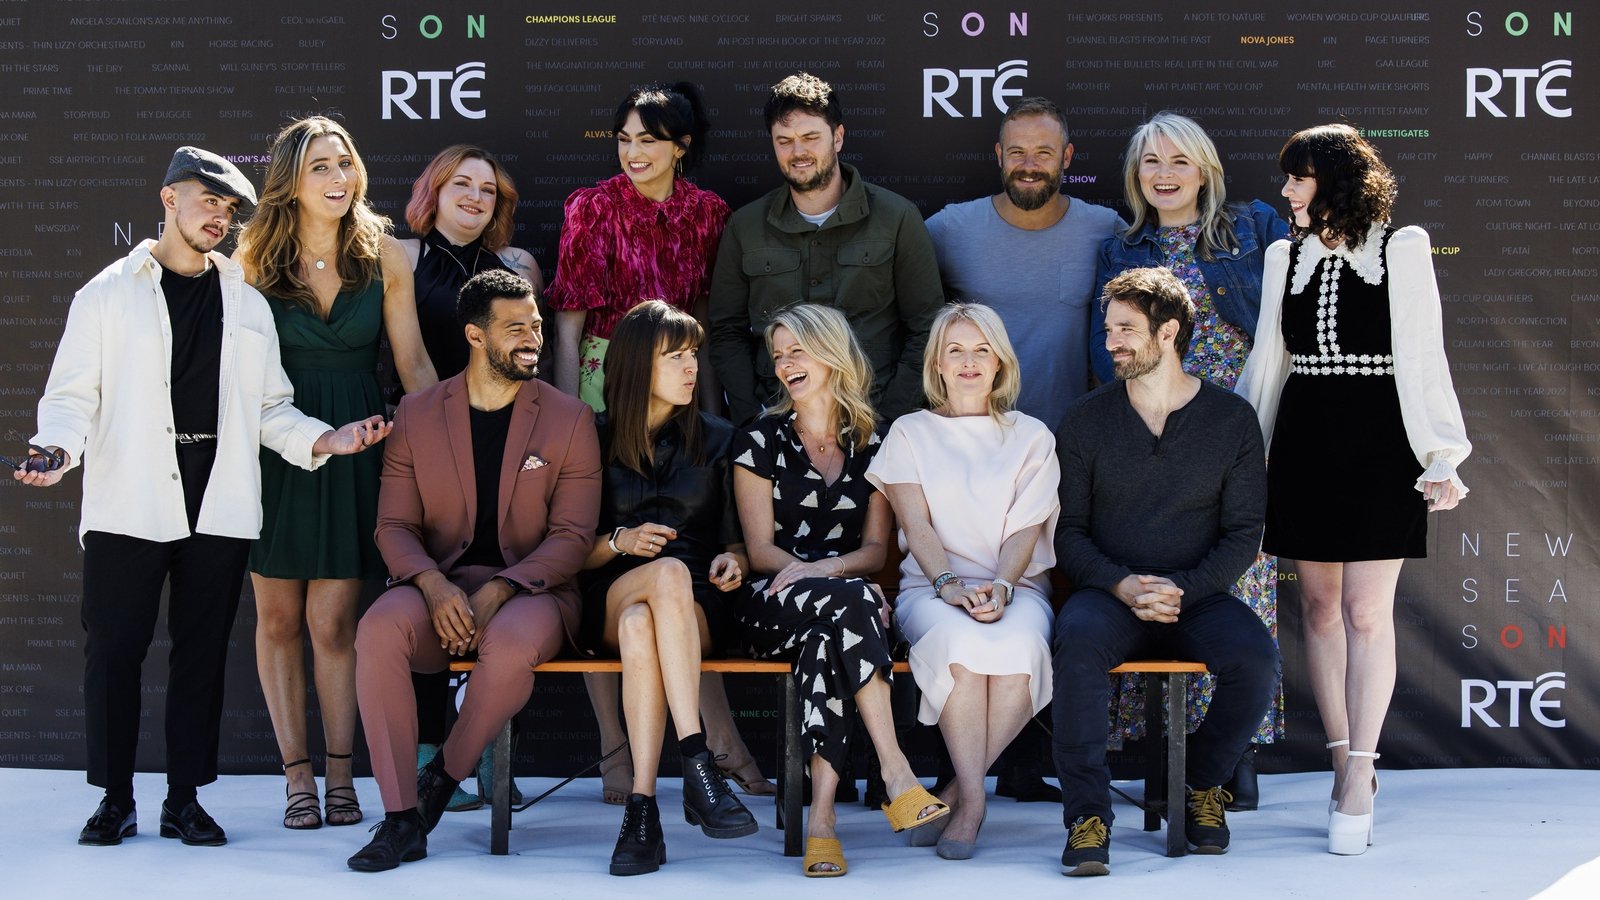 Launch of new RTÉ season highlights funding concerns